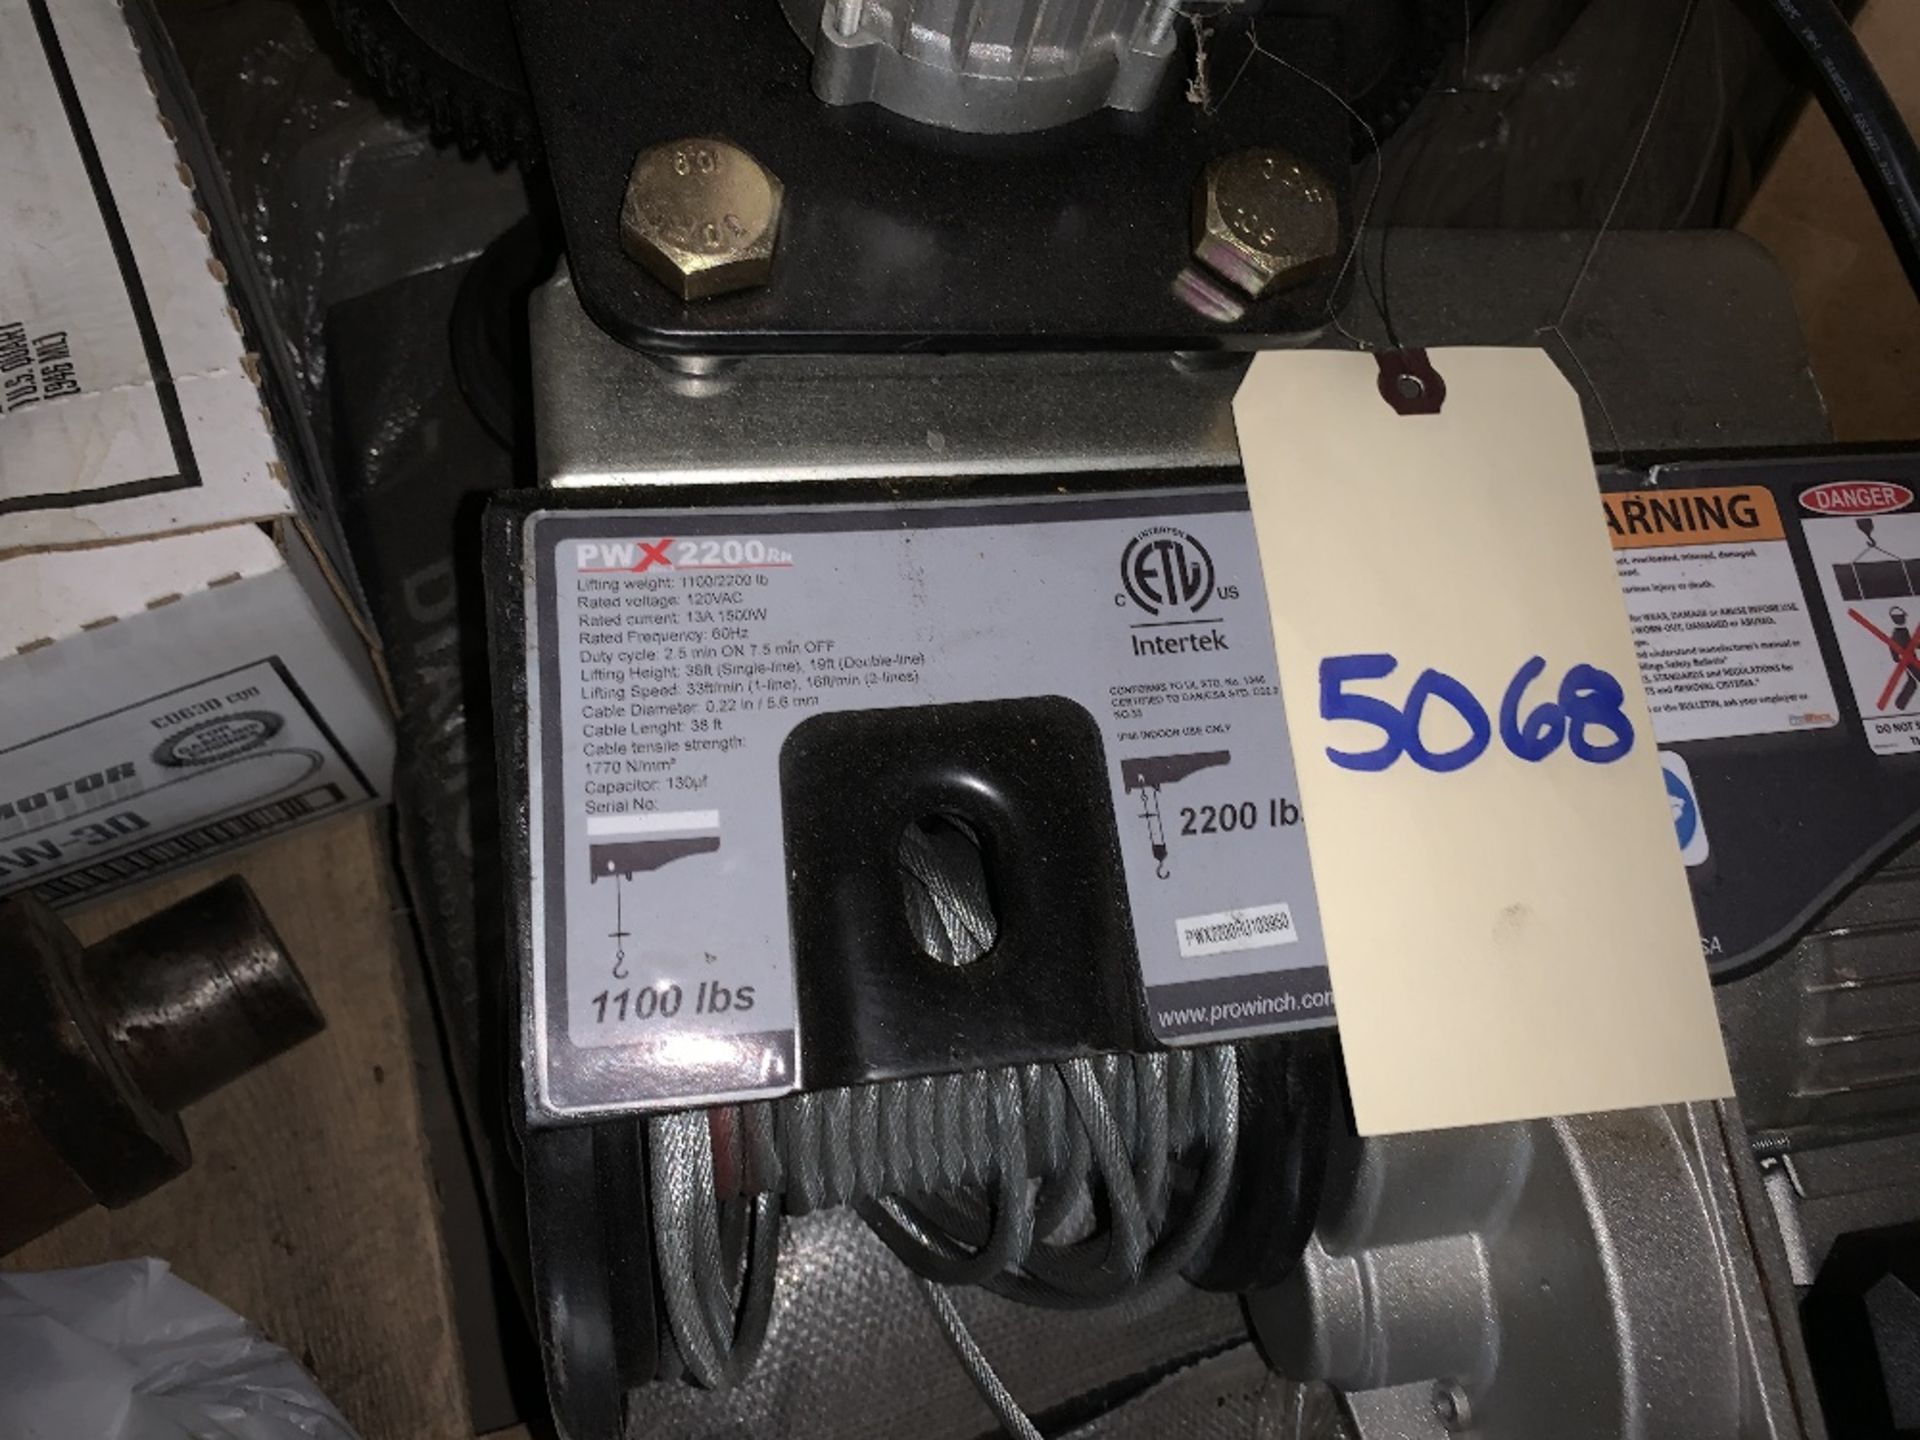 Canon City CO ProWinch PWX2200 electric winch for use on overhead cranes, purchased new but not - Image 3 of 3